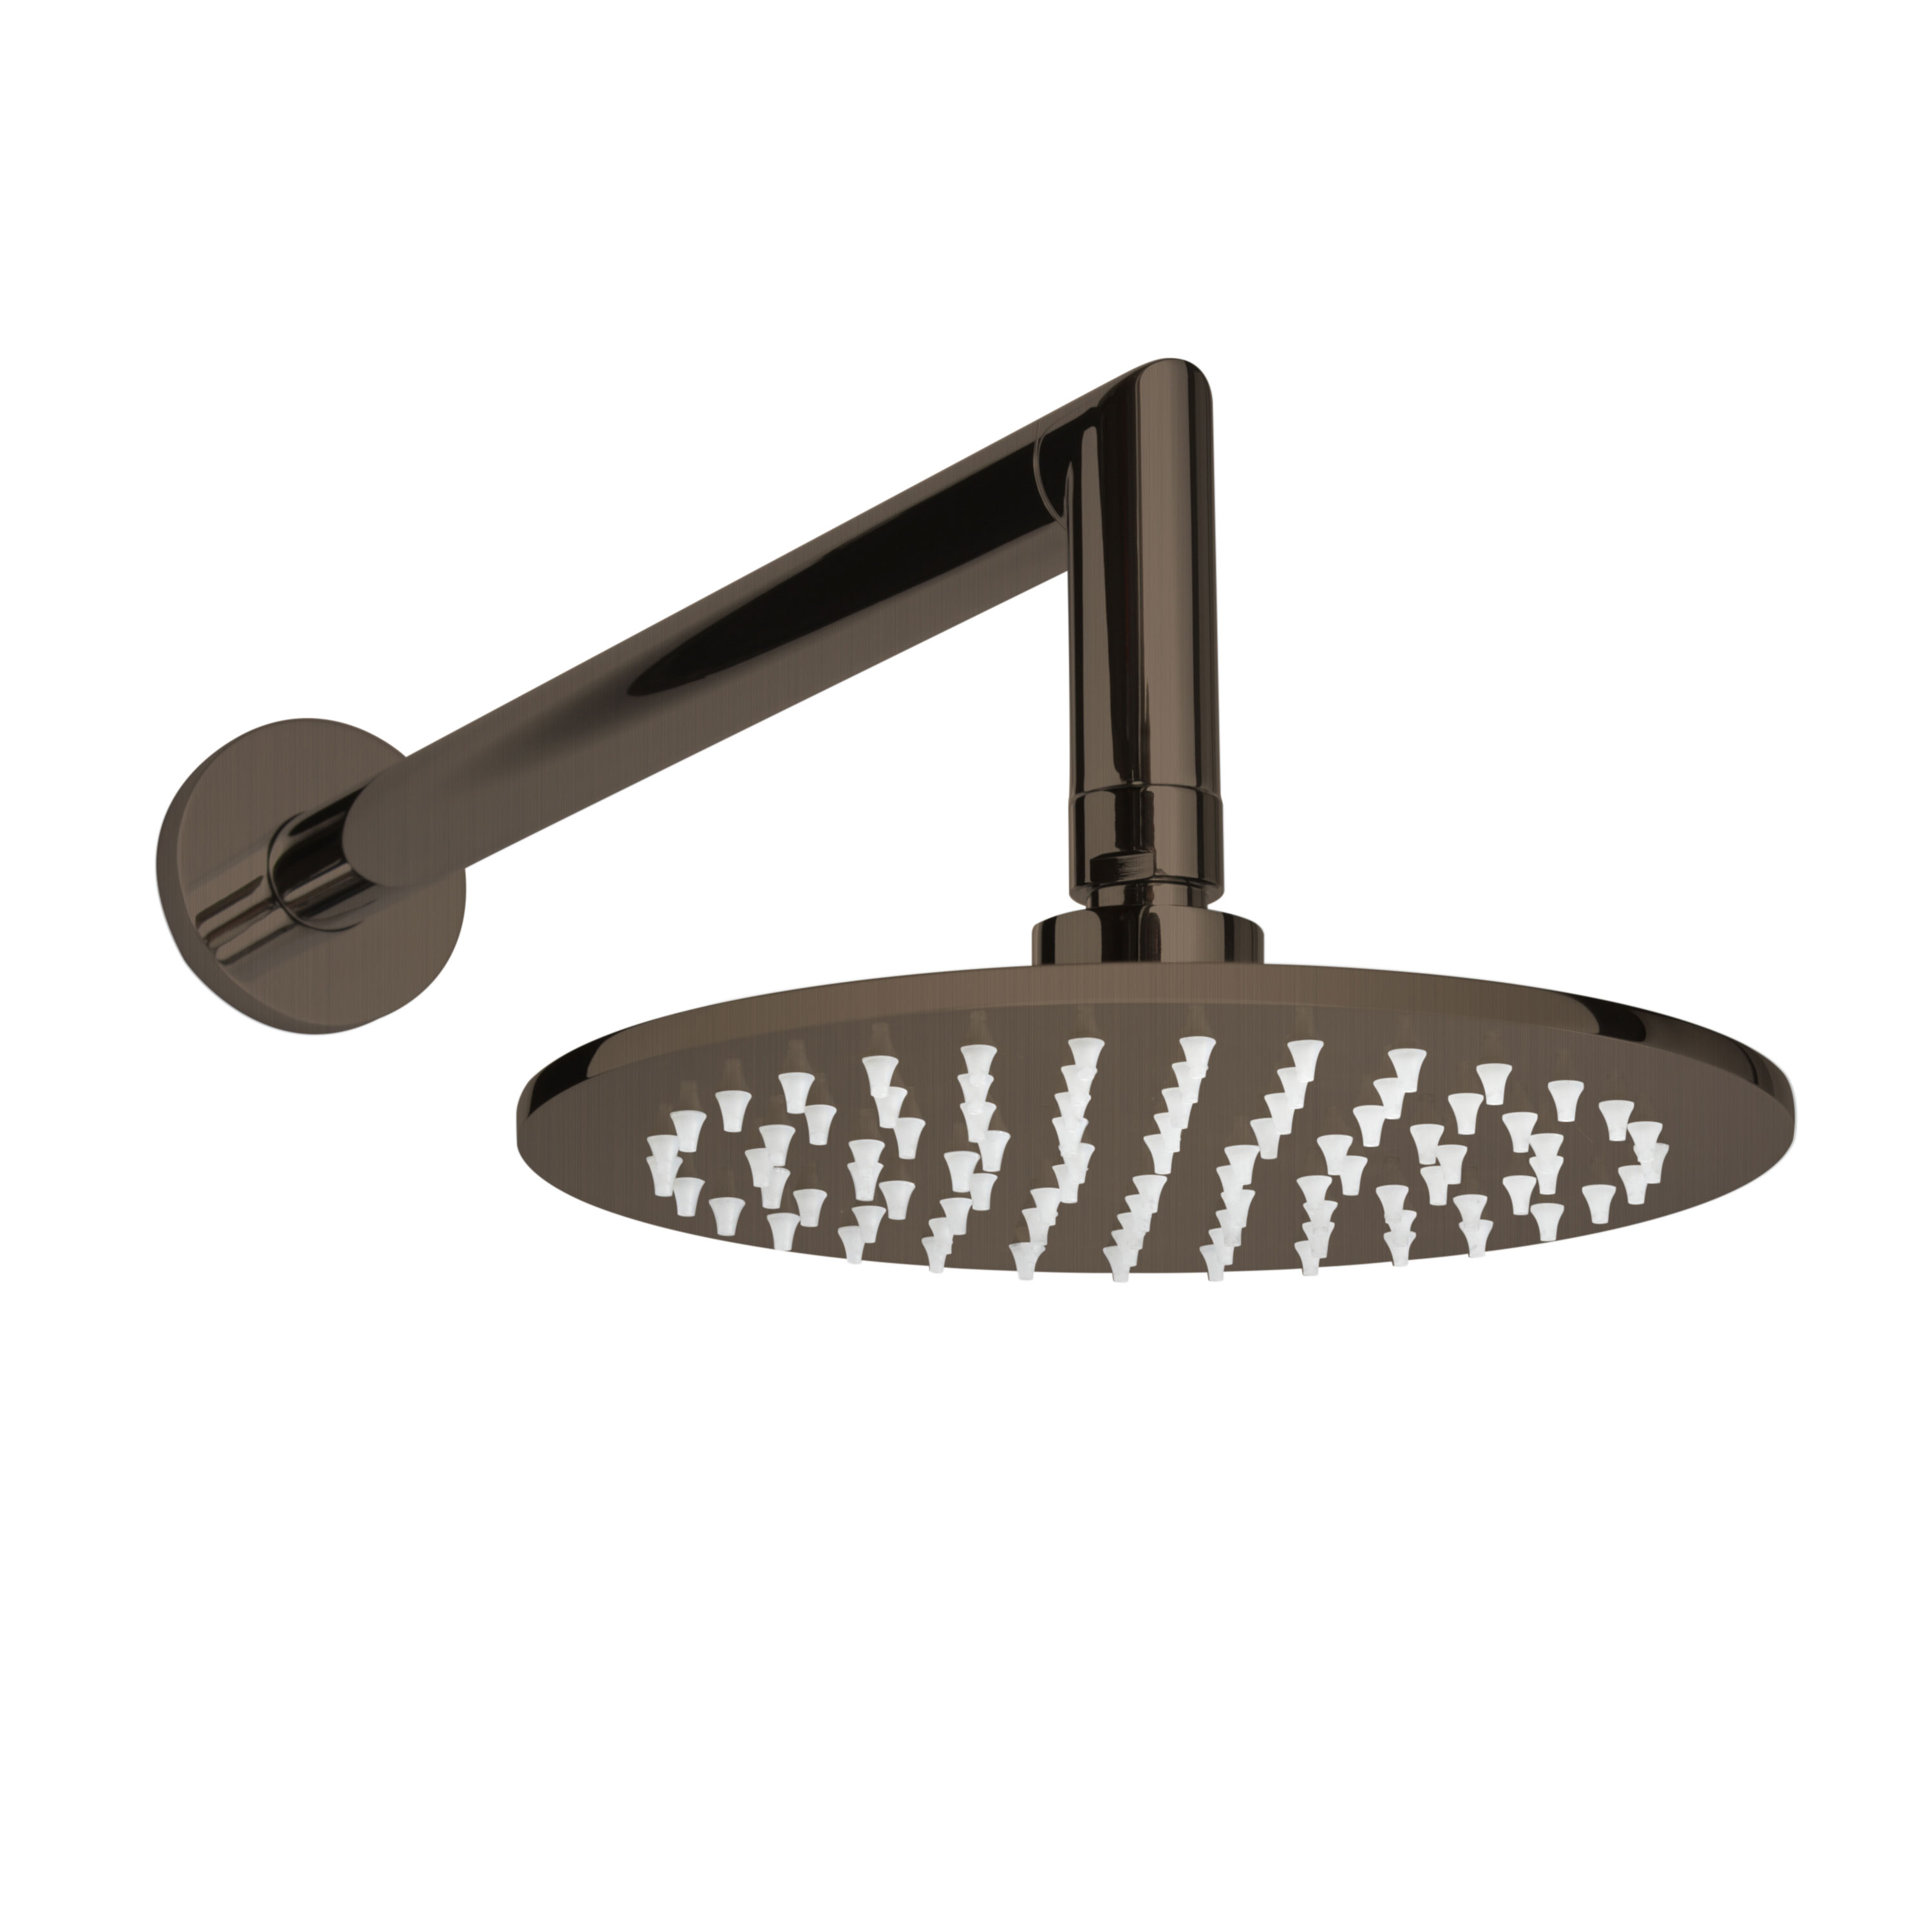 Thermasol 15-1007-ORB 200mm DIA. x 8.5mm, 304SS Shower Head 1/2" Inlet Round - Oil Rubbed Bronze